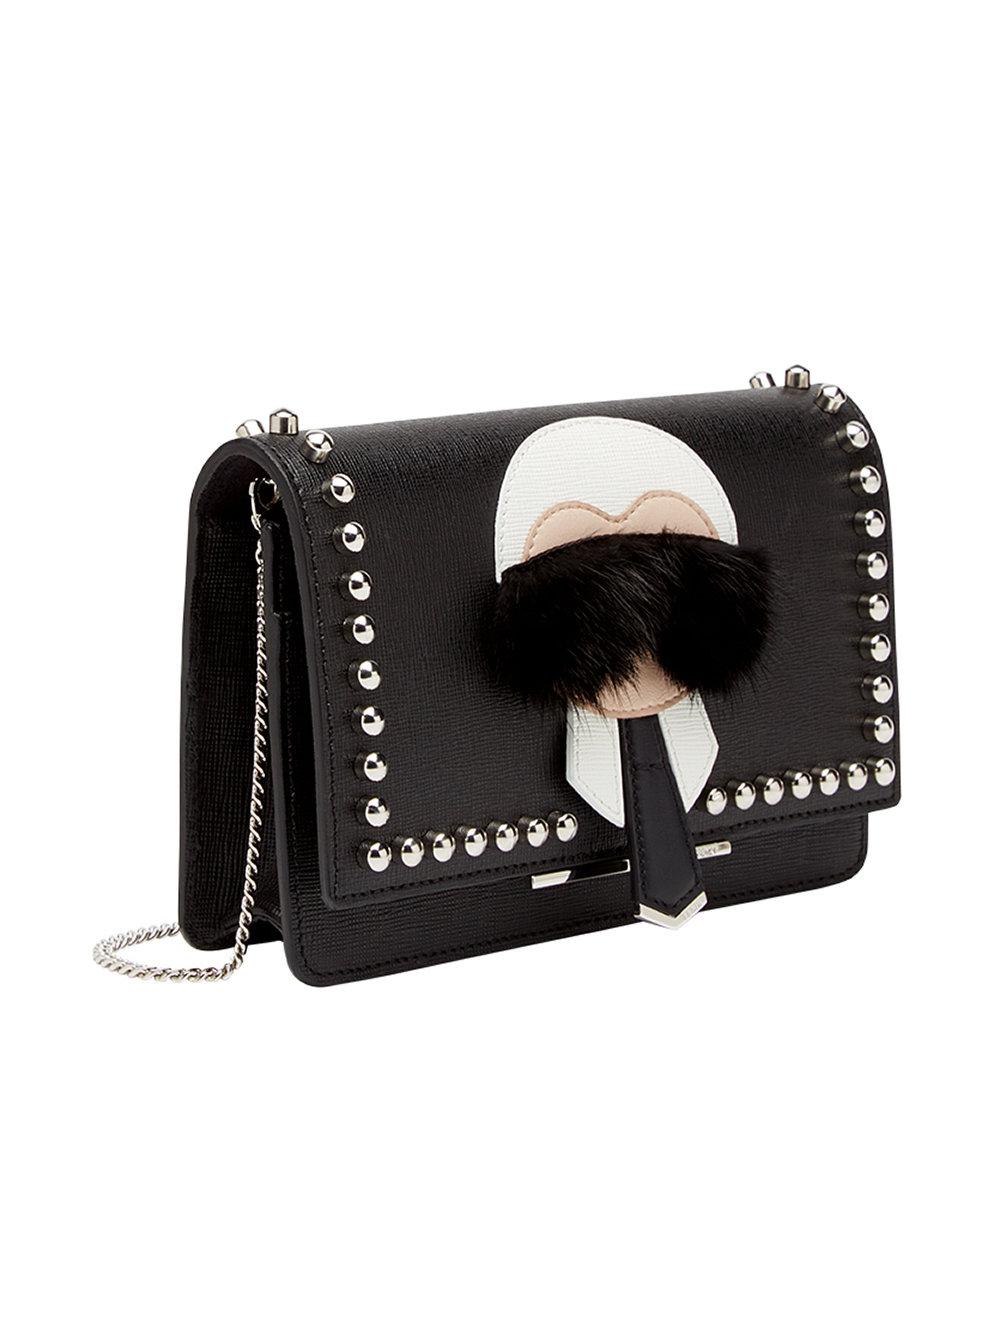 Fendi Leather Karlito Wallet On Chain in Black - Lyst